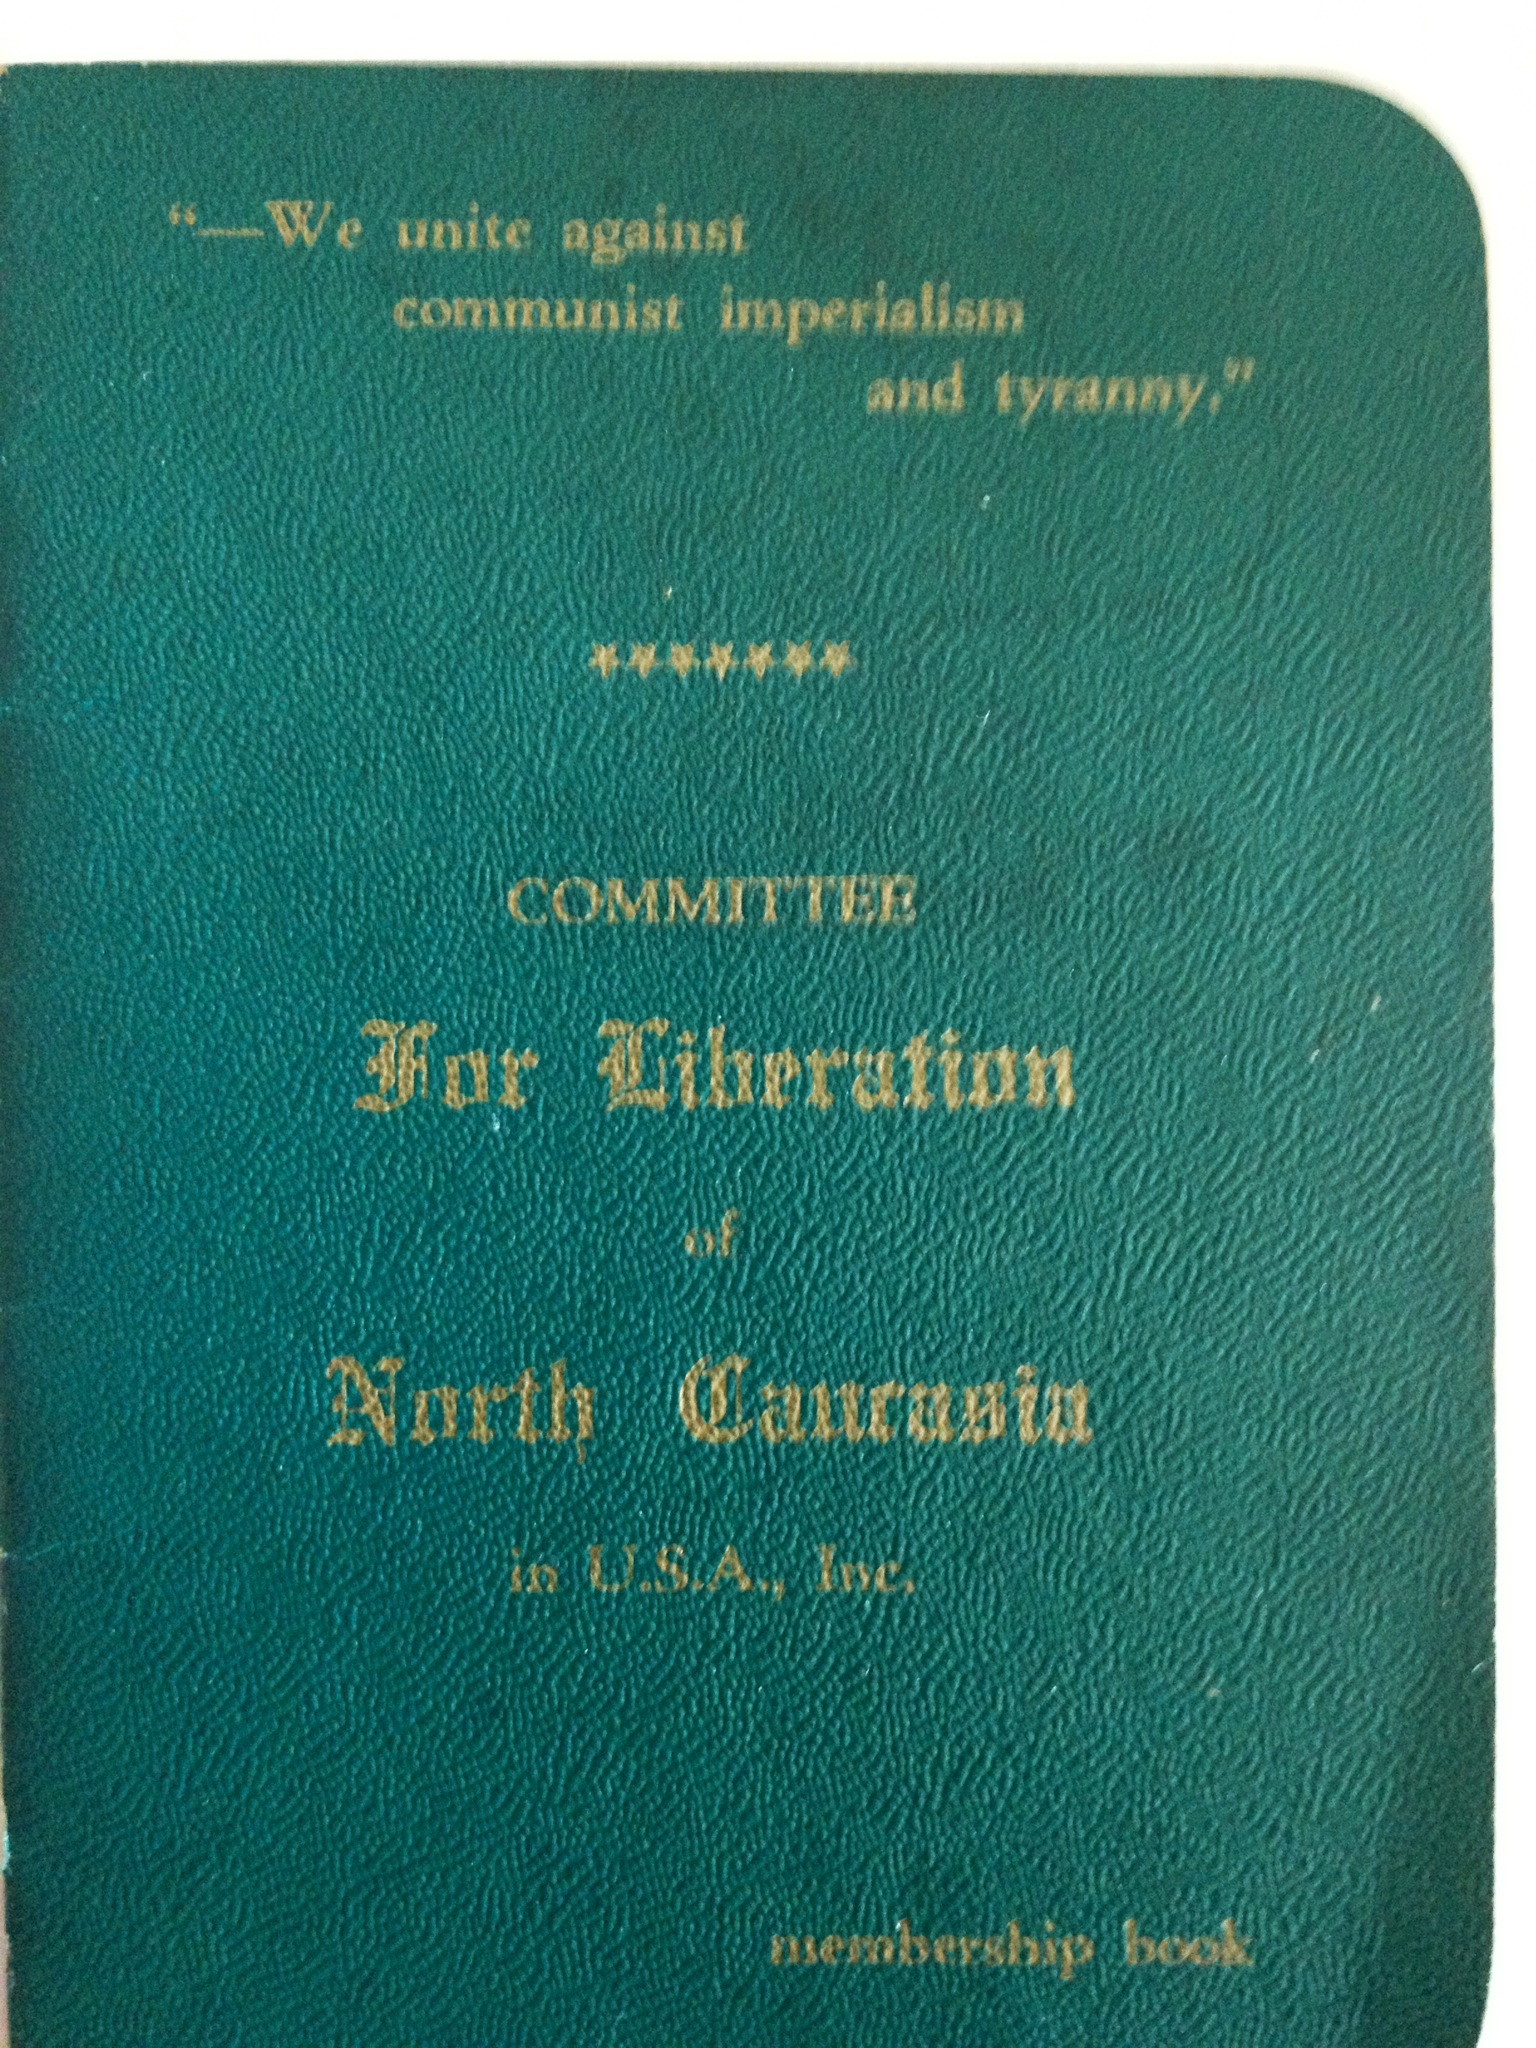 Documents about the “Committee for the Liberation of the North Caucasus” in the Soviet Era